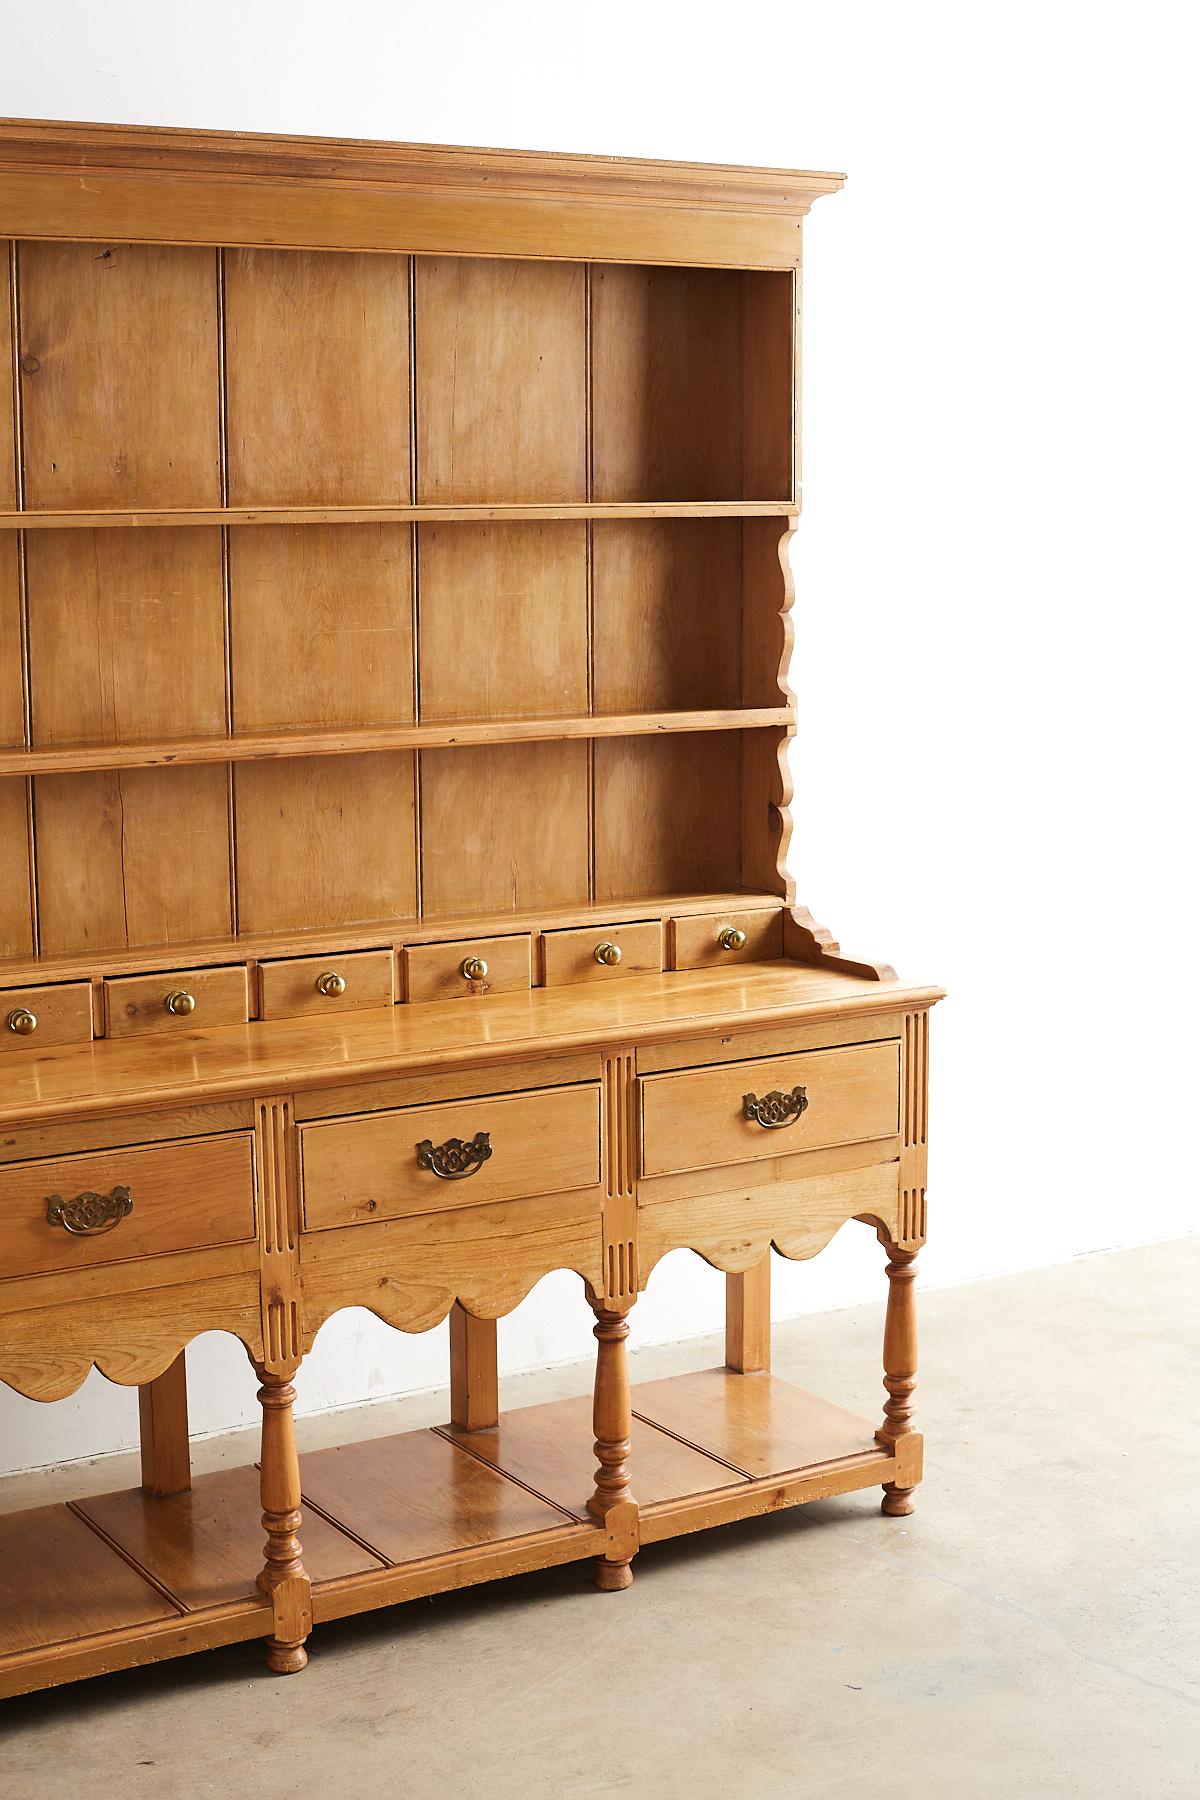 Grand English pine Welsh dresser or sideboard with a pot board and rack. Featuring a large rack with a row of nine small drawers in a row having large brass ball pulls. The generous dresser is fronted by four large drawers each with a brass handle